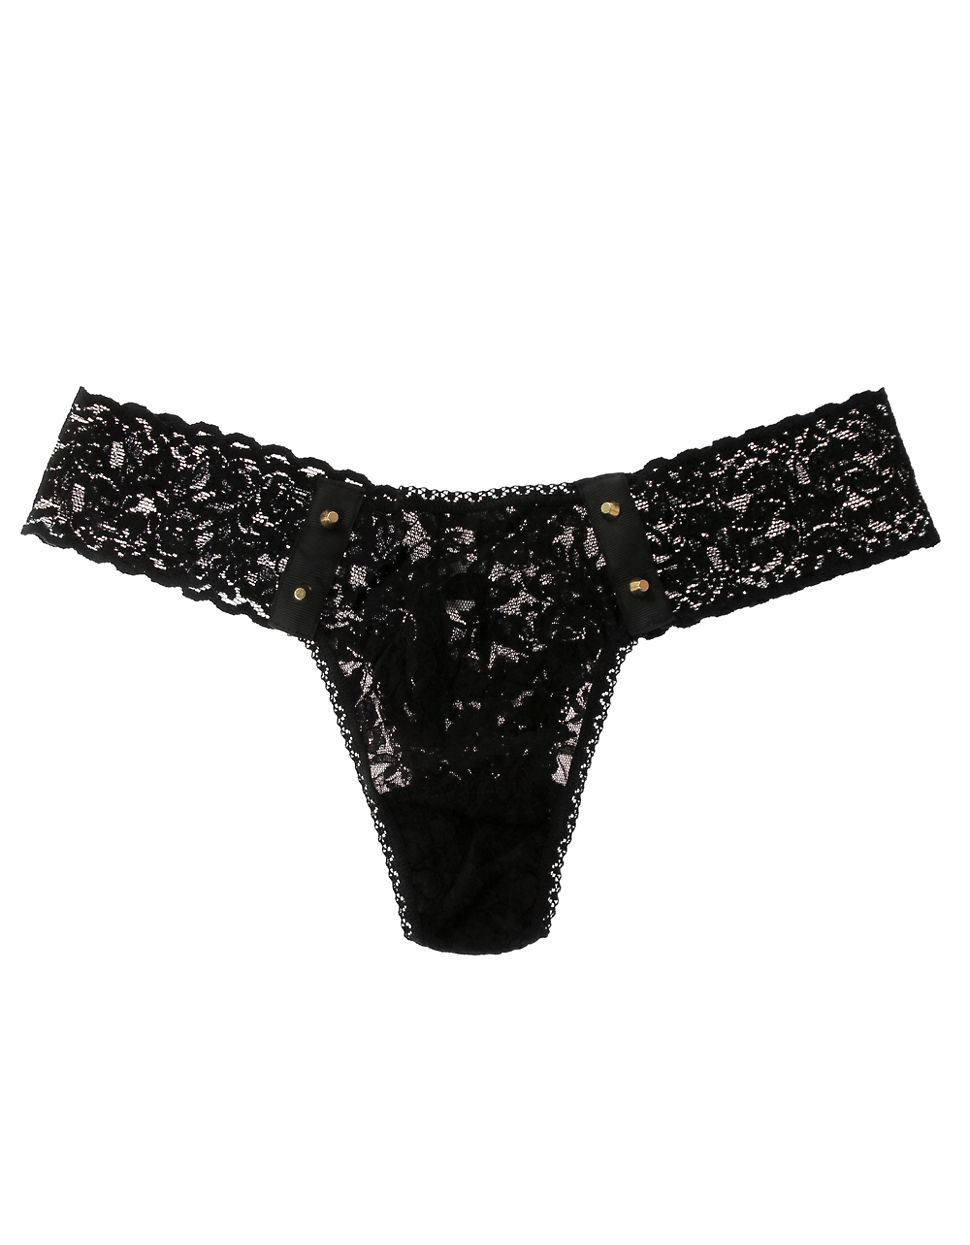 Lyst - Hanky Panky After Midnight Studded Lace Thong in Black